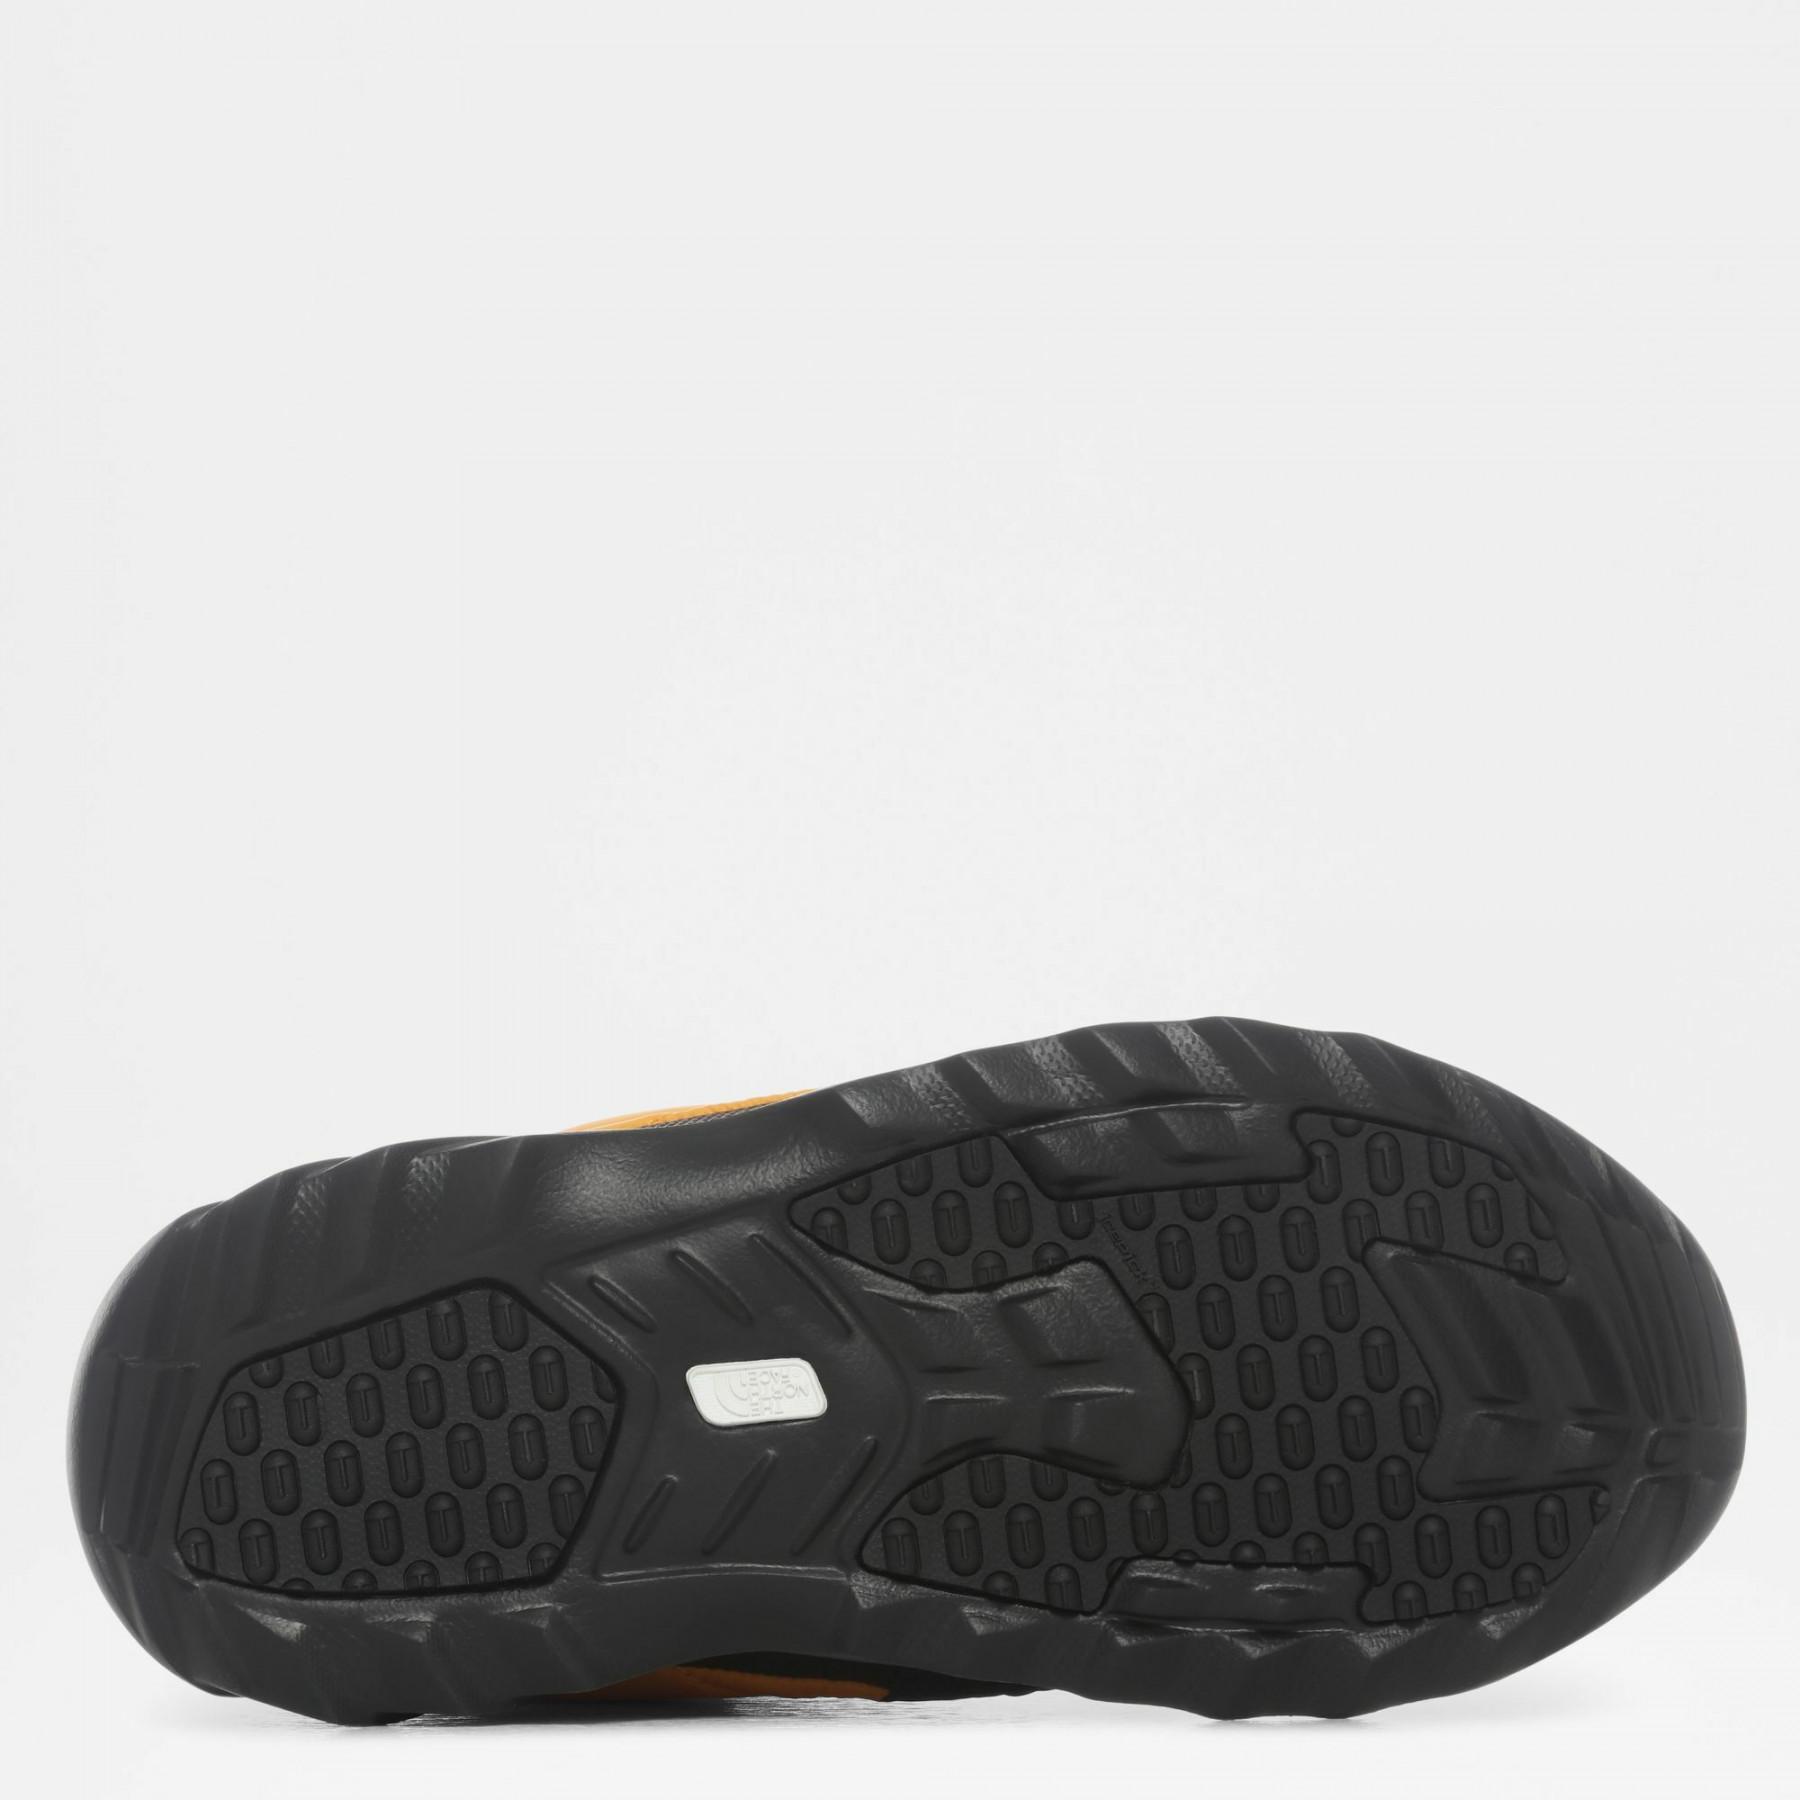 Sneakers The North Face Nuptse Bootie 700